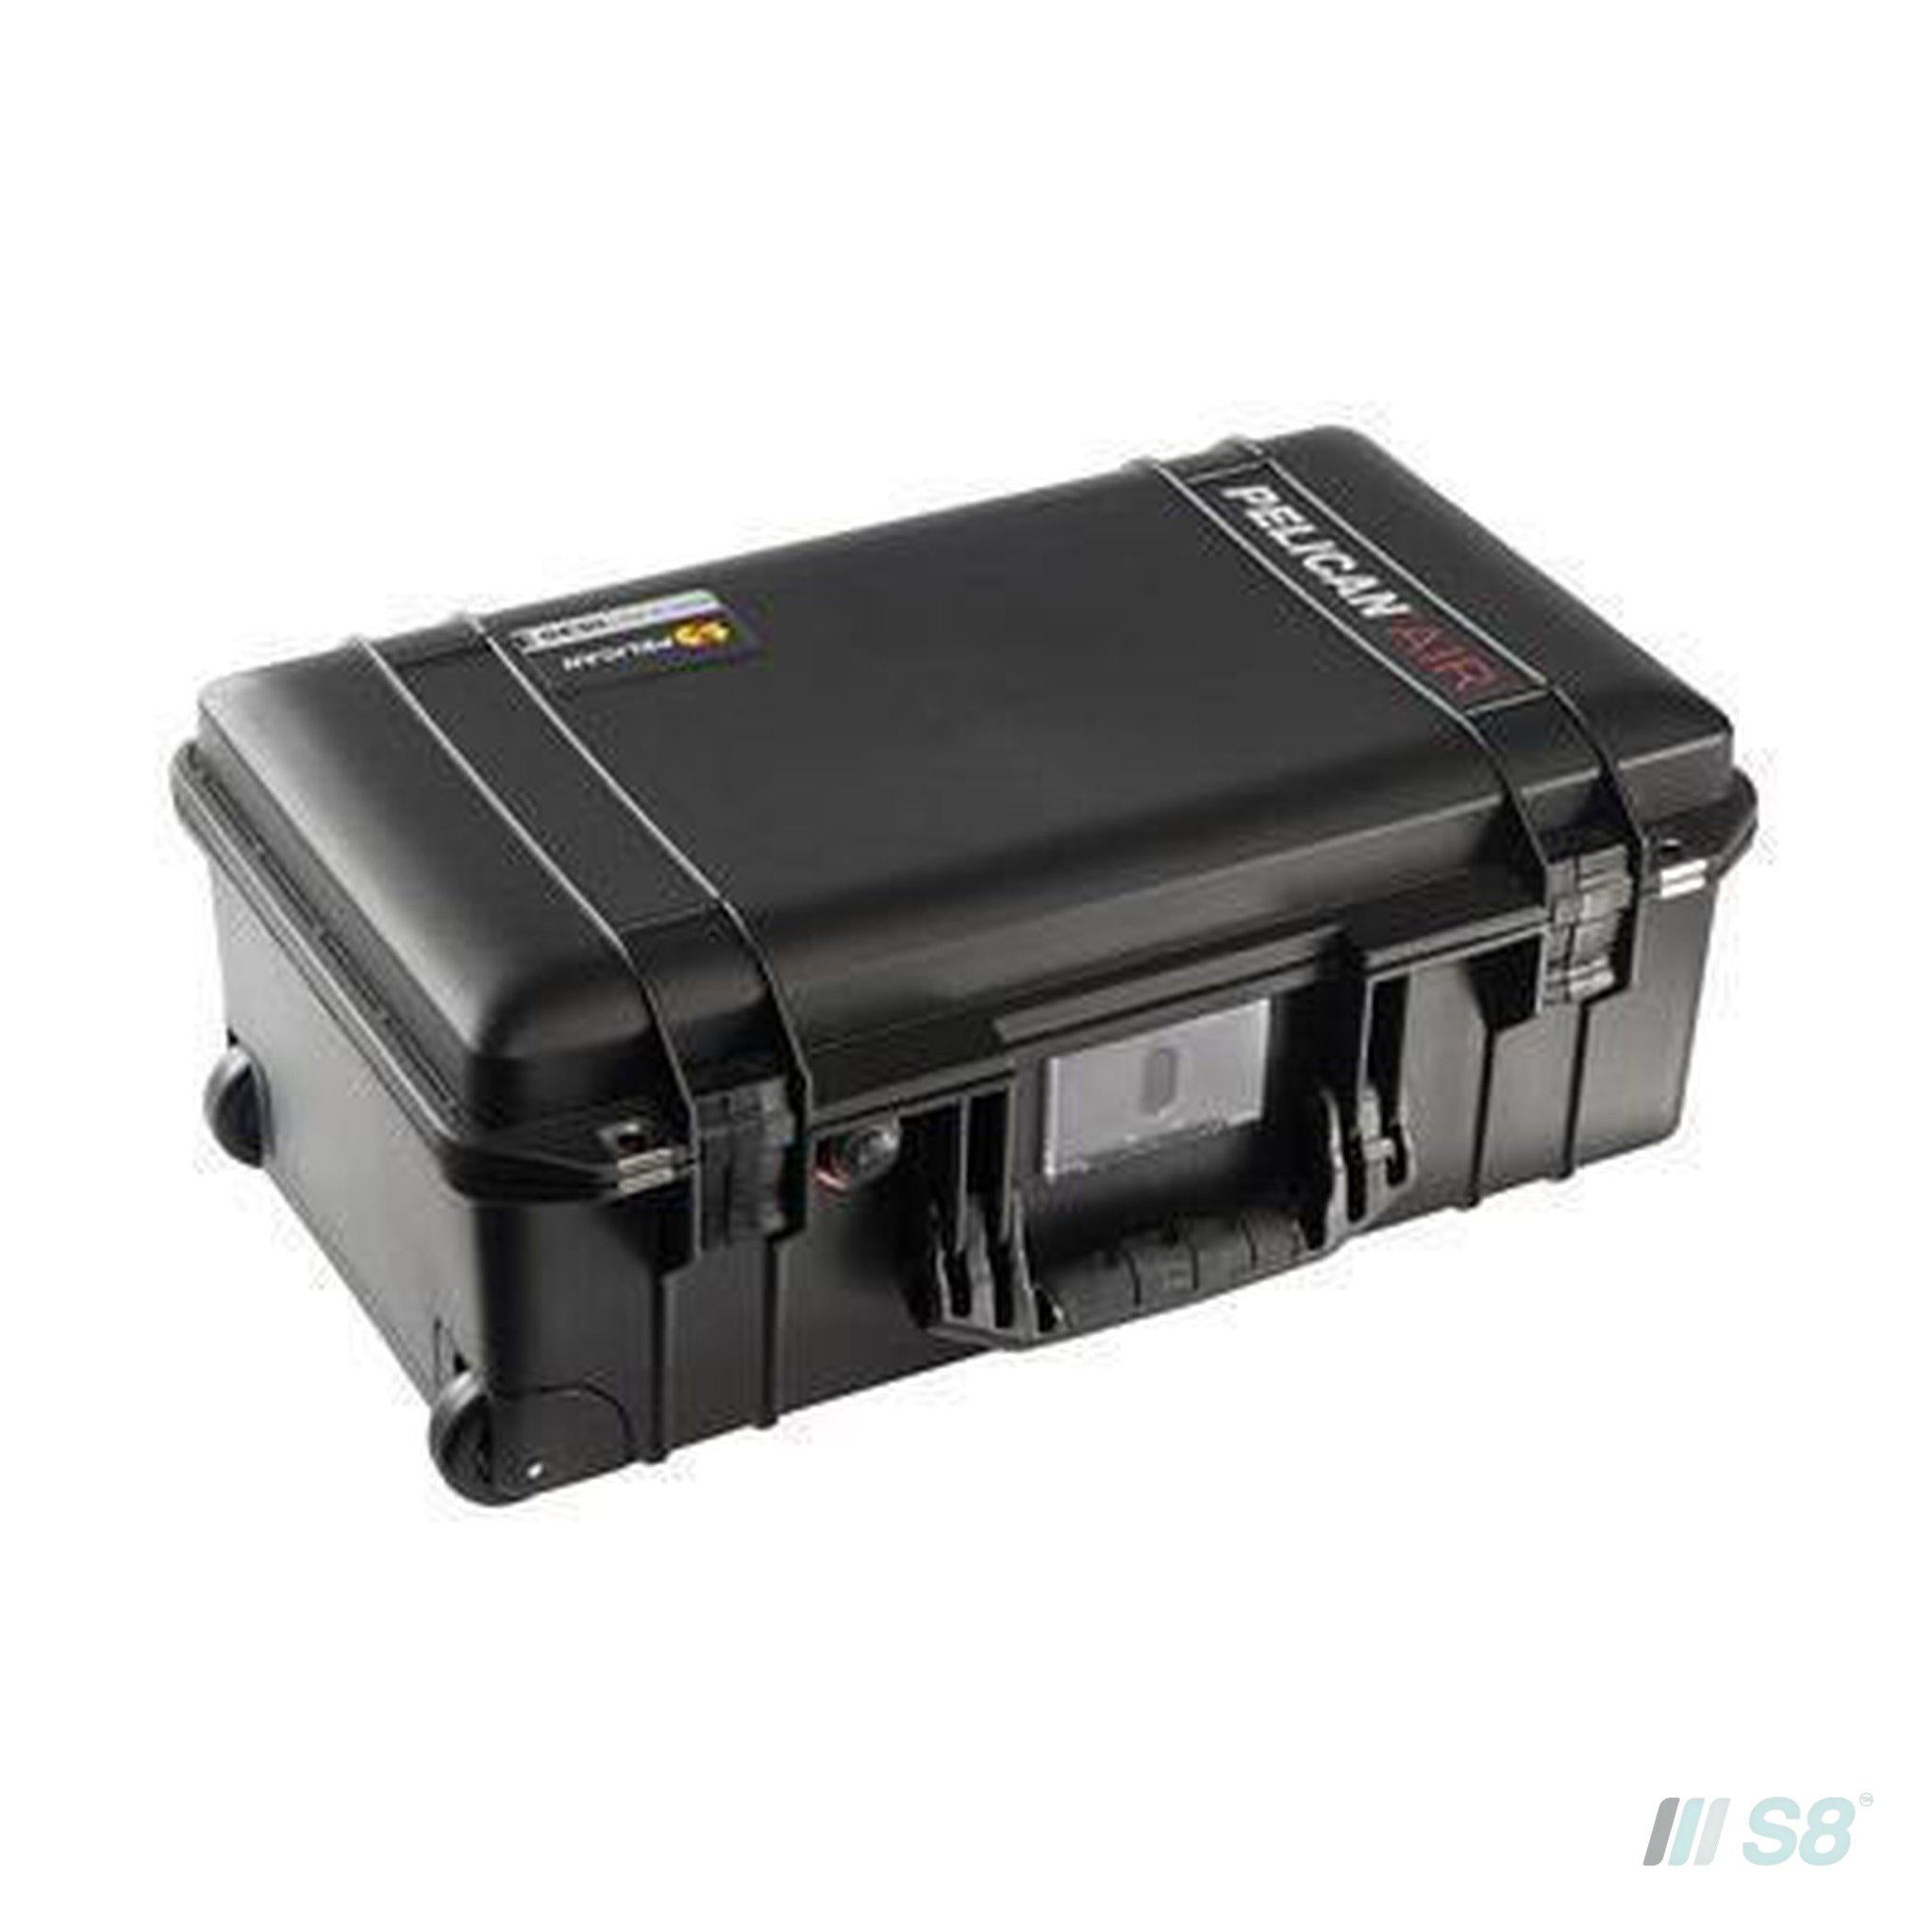 1535 AIR, WL/WF, BLACK-Pelican-S8 Products Group